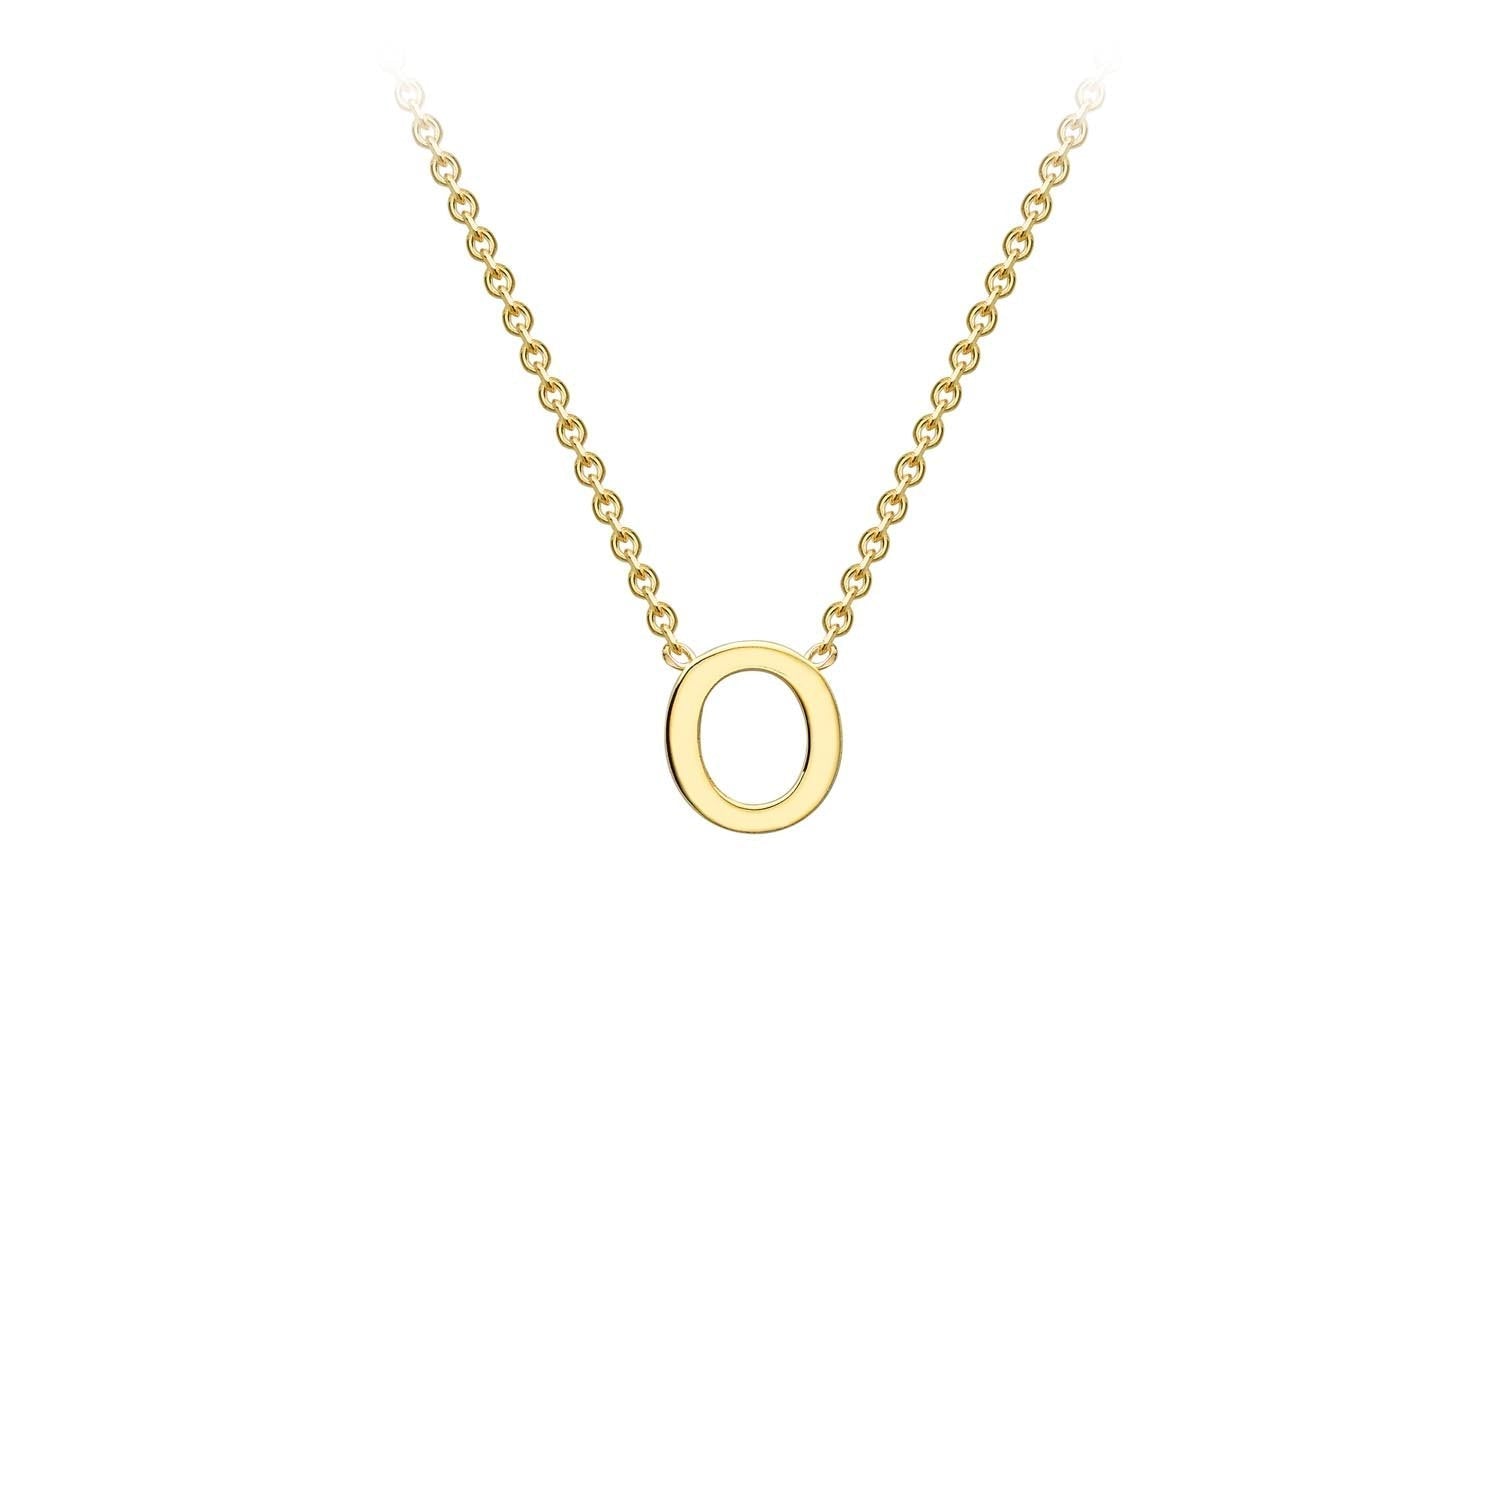 9ct Yellow Gold 'O' Initial Adjustable Letter Necklace 38/43cm